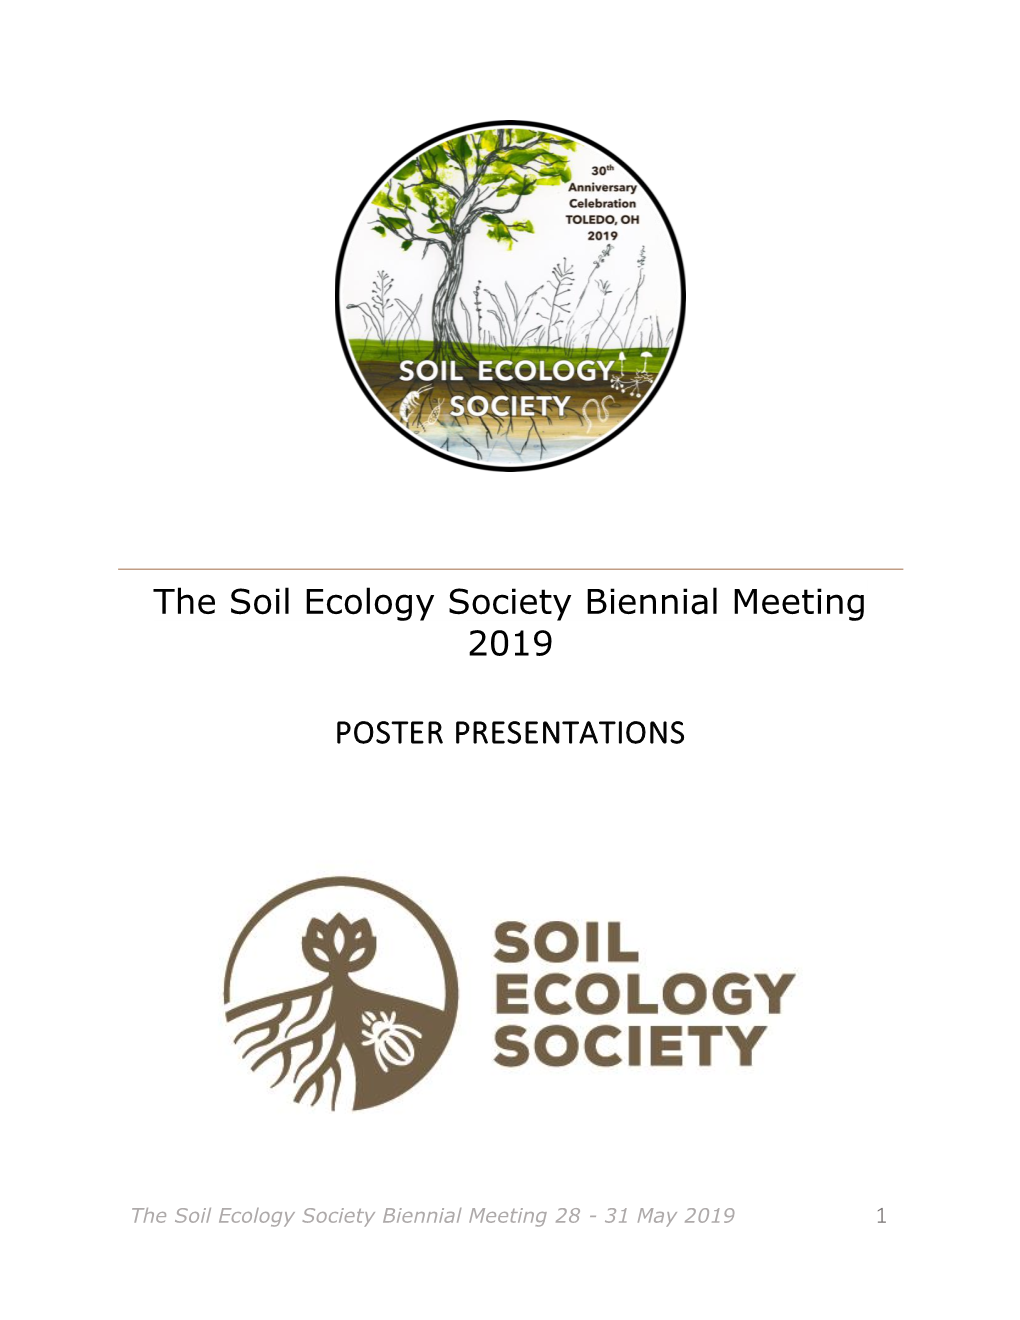 The Soil Ecology Society Biennial Meeting 2019 POSTER